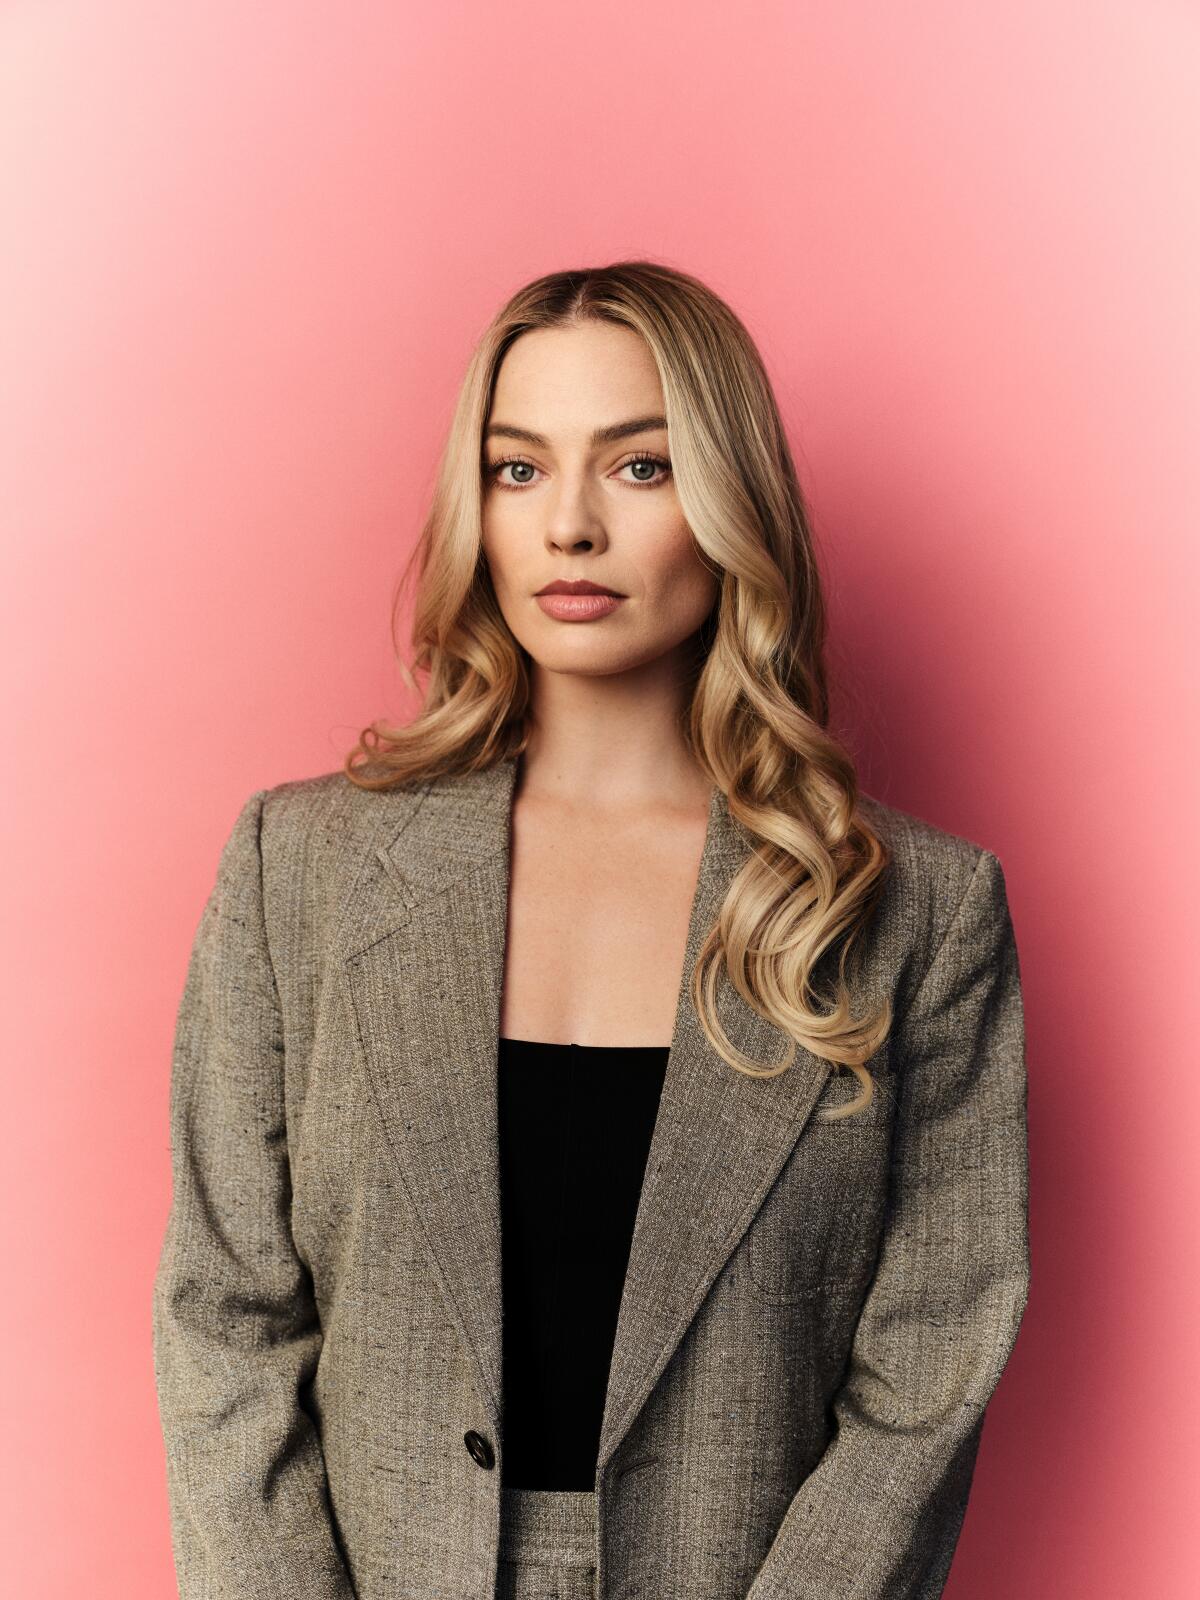 Margot Robbie, with her long blond hair in waves, stands in front of a pink background.